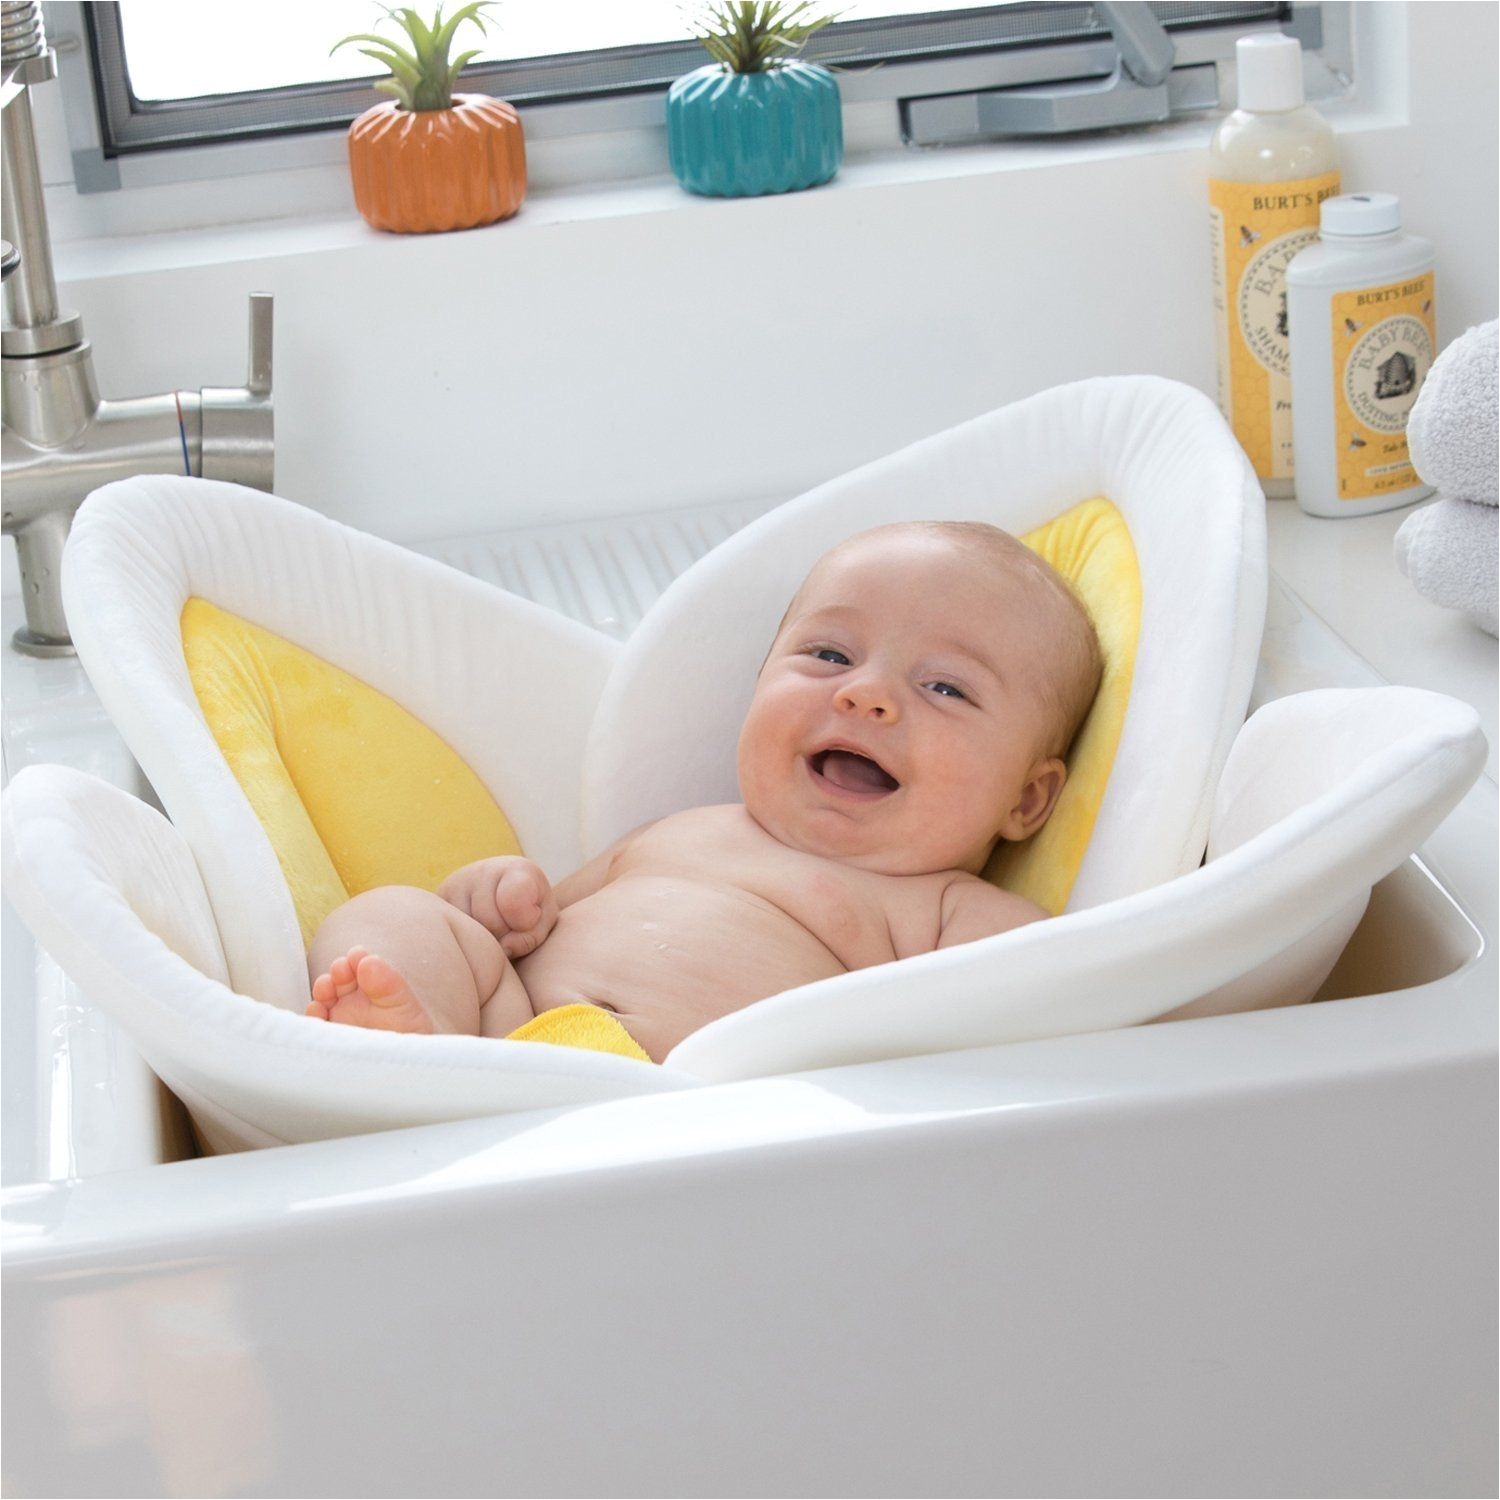 the blooming bath lotus is the latest and greatest product from blooming baby and incorporates